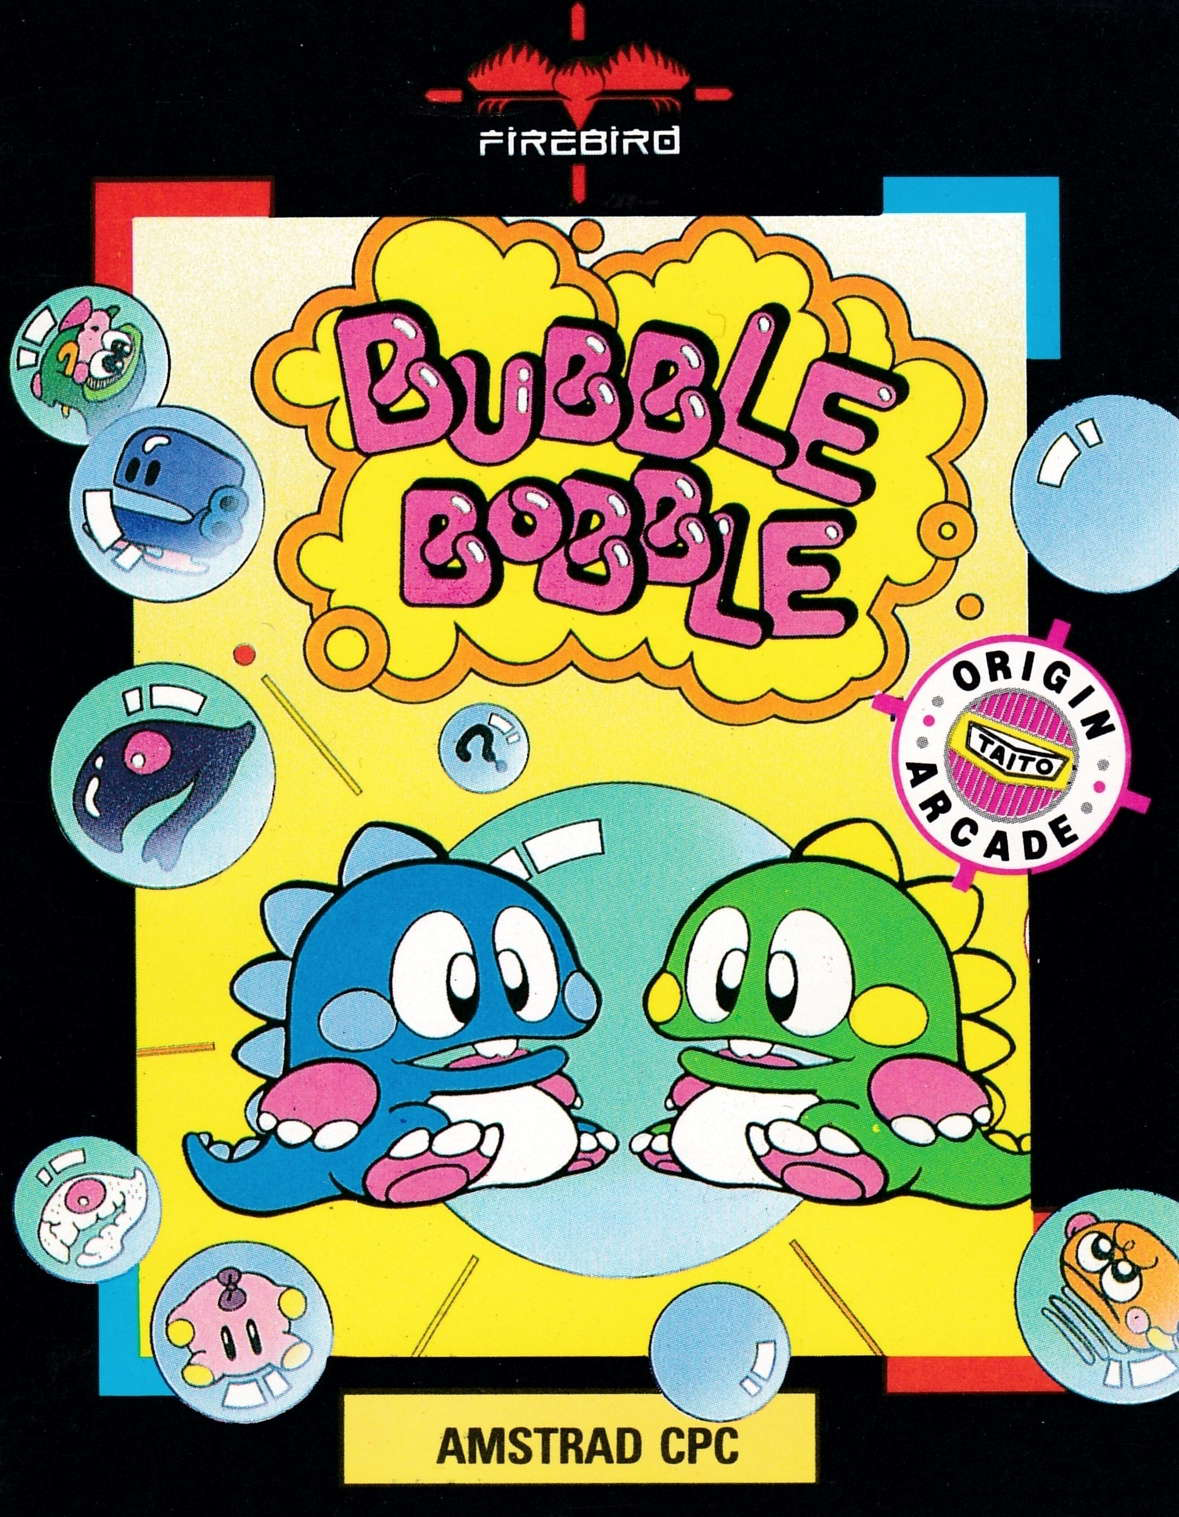 cover of the Amstrad CPC game Bubble Bobble  by GameBase CPC